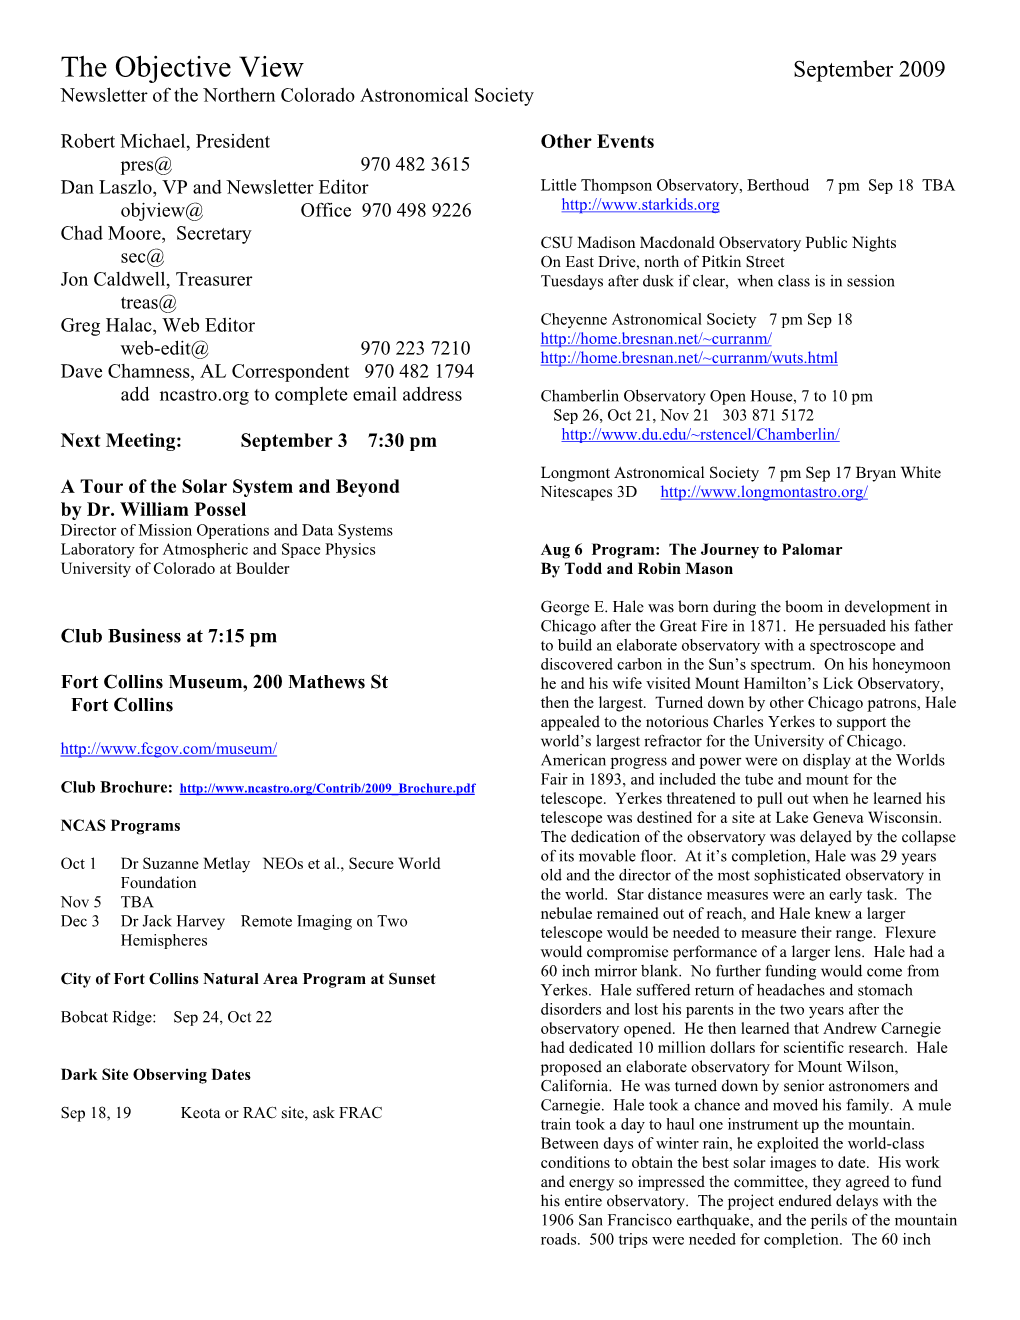 September 2009 Newsletter of the Northern Colorado Astronomical Society